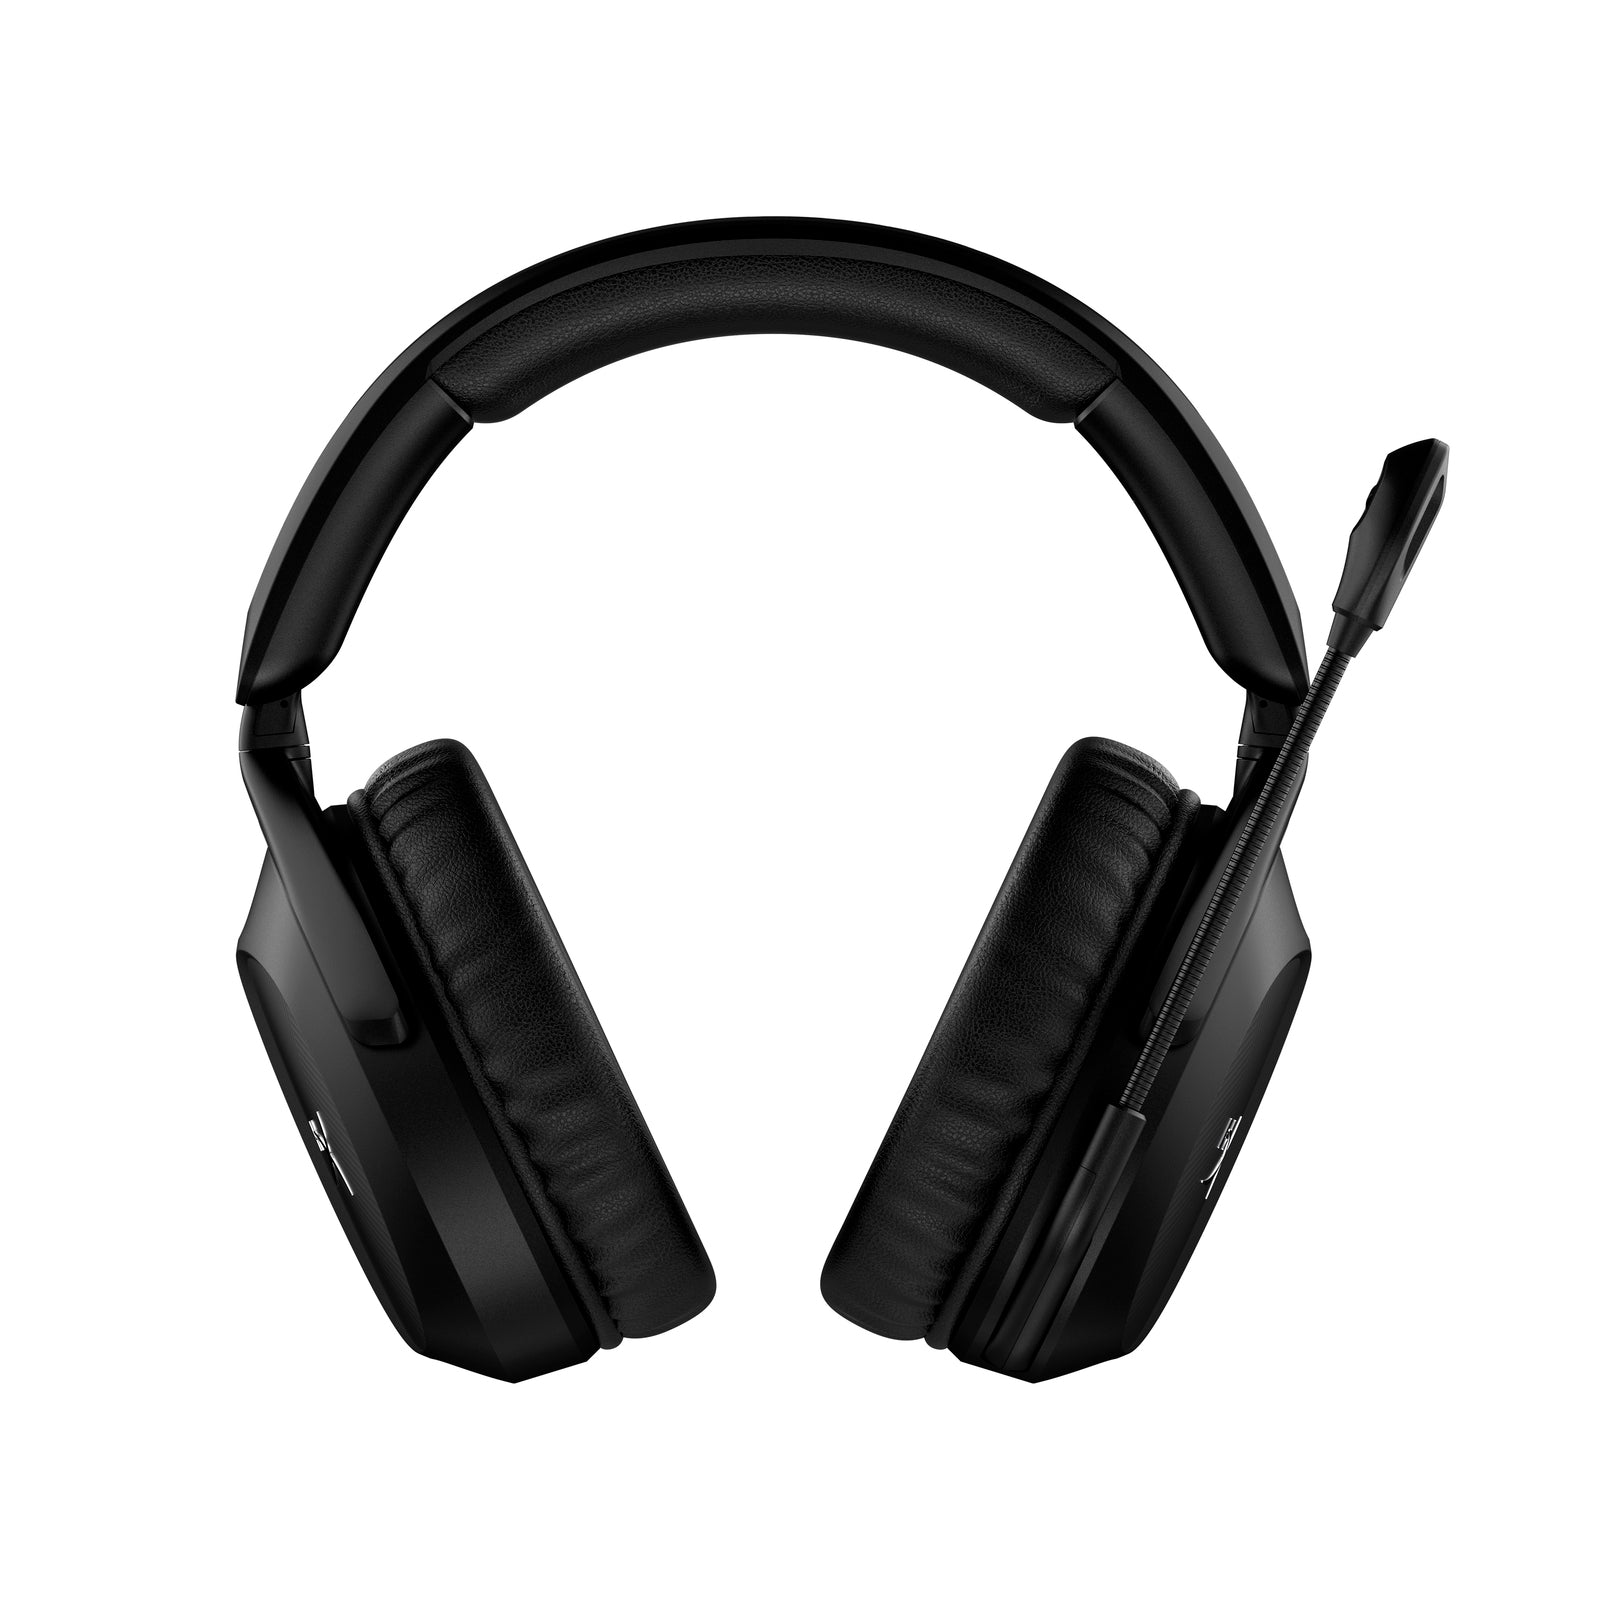 Cloud Stinger 2 – USB Wireless Gaming Headset for PC | HyperX